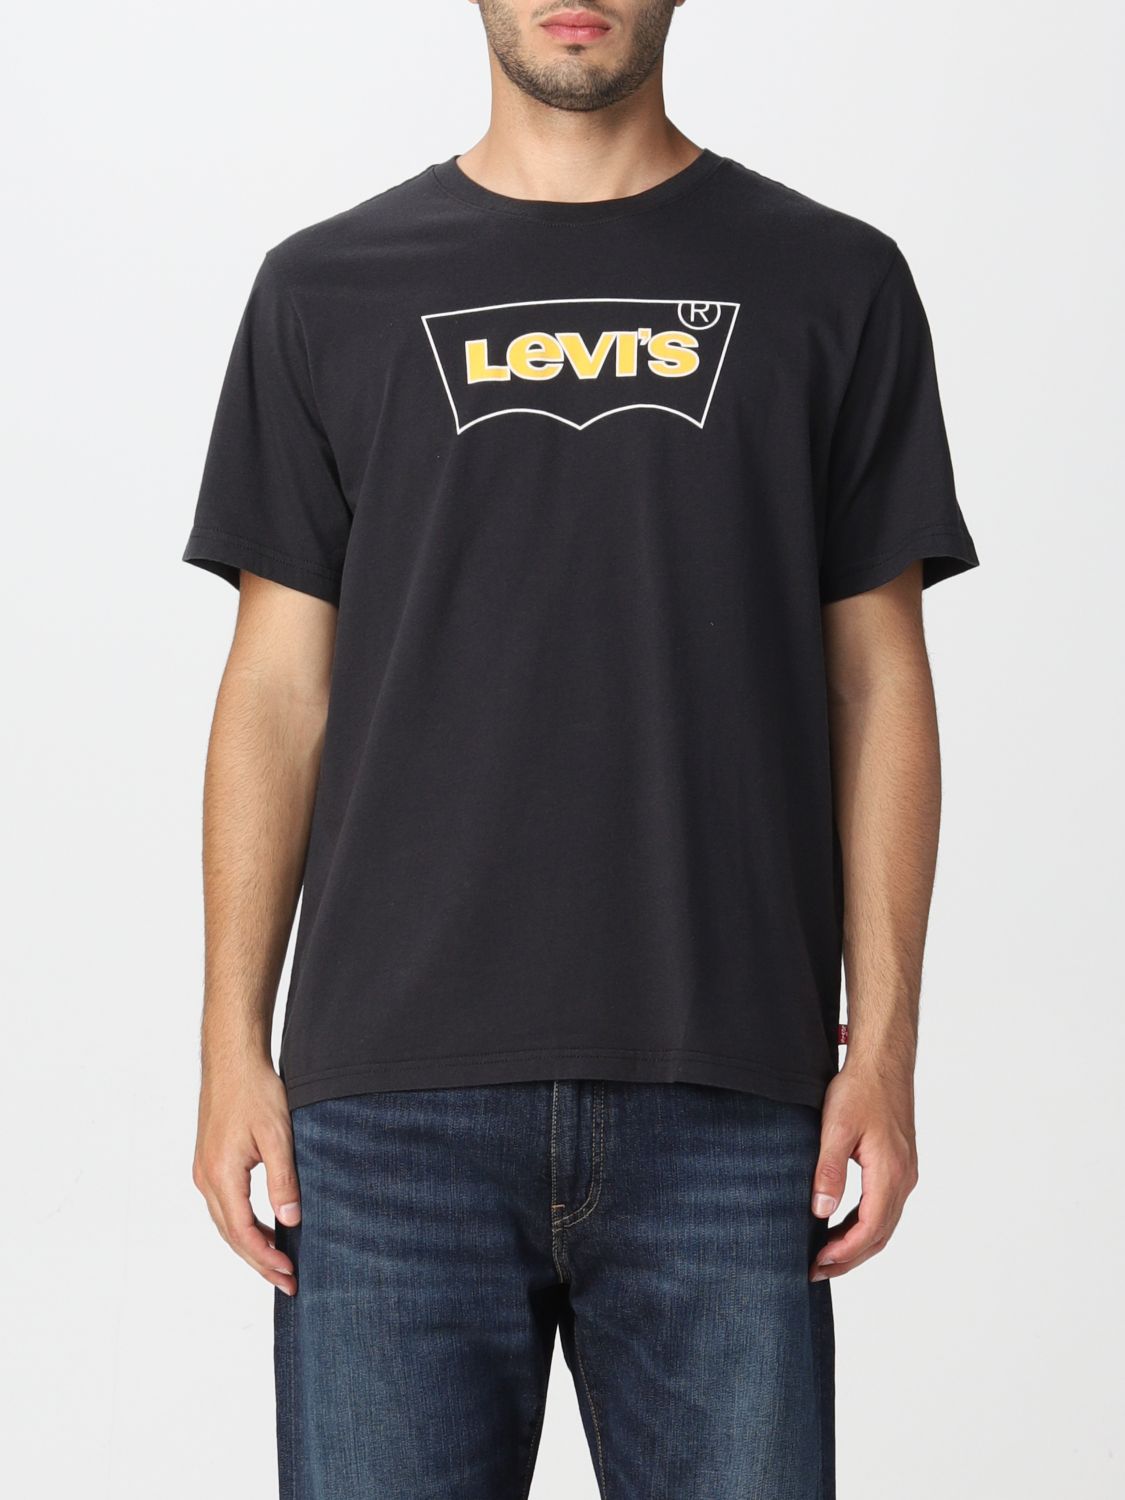 Begunstigde onderpand Treinstation Levi's Outlet: t-shirt for man - Charcoal | Levi's t-shirt 161430474 online  on GIGLIO.COM